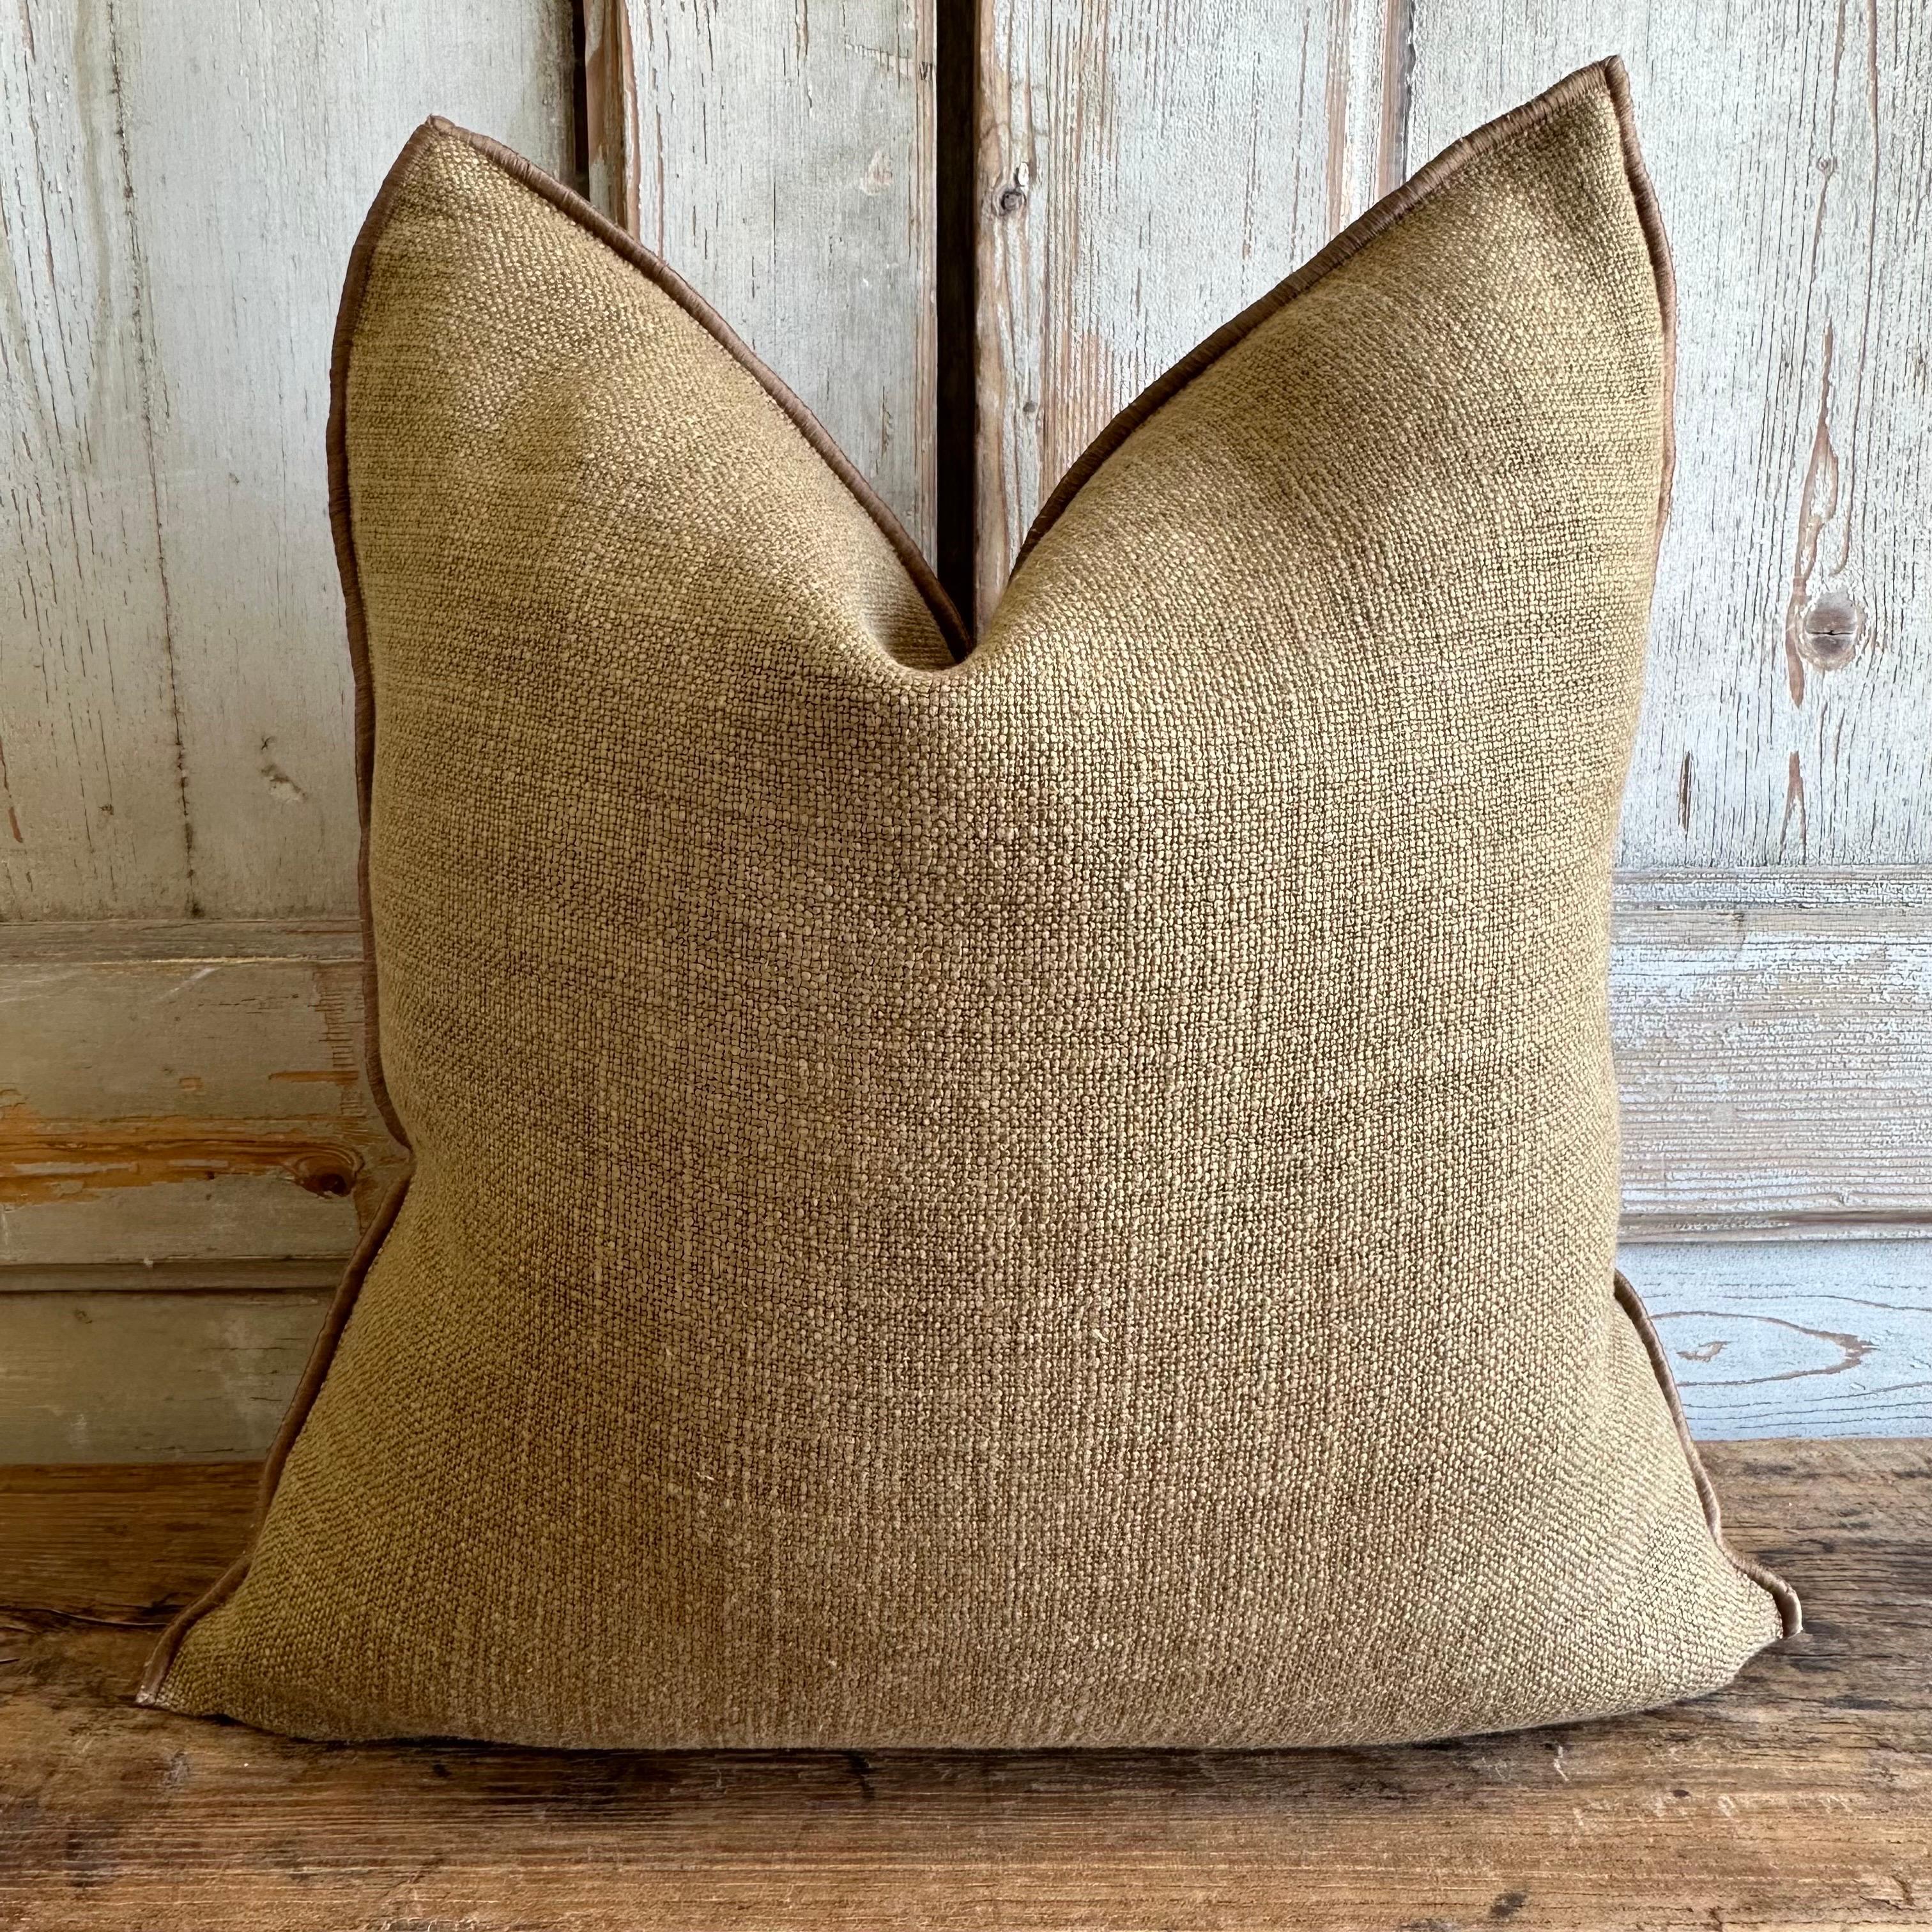  Welcome to bloomhomeinc we stock over 2000 items, please scroll down and click view sellers other items to see more!

Textured linen pillow, made in Paris France.
Color: Havane (terracotta)
Double sided pillow
Size: 20x20
-Antique Brass Zipper